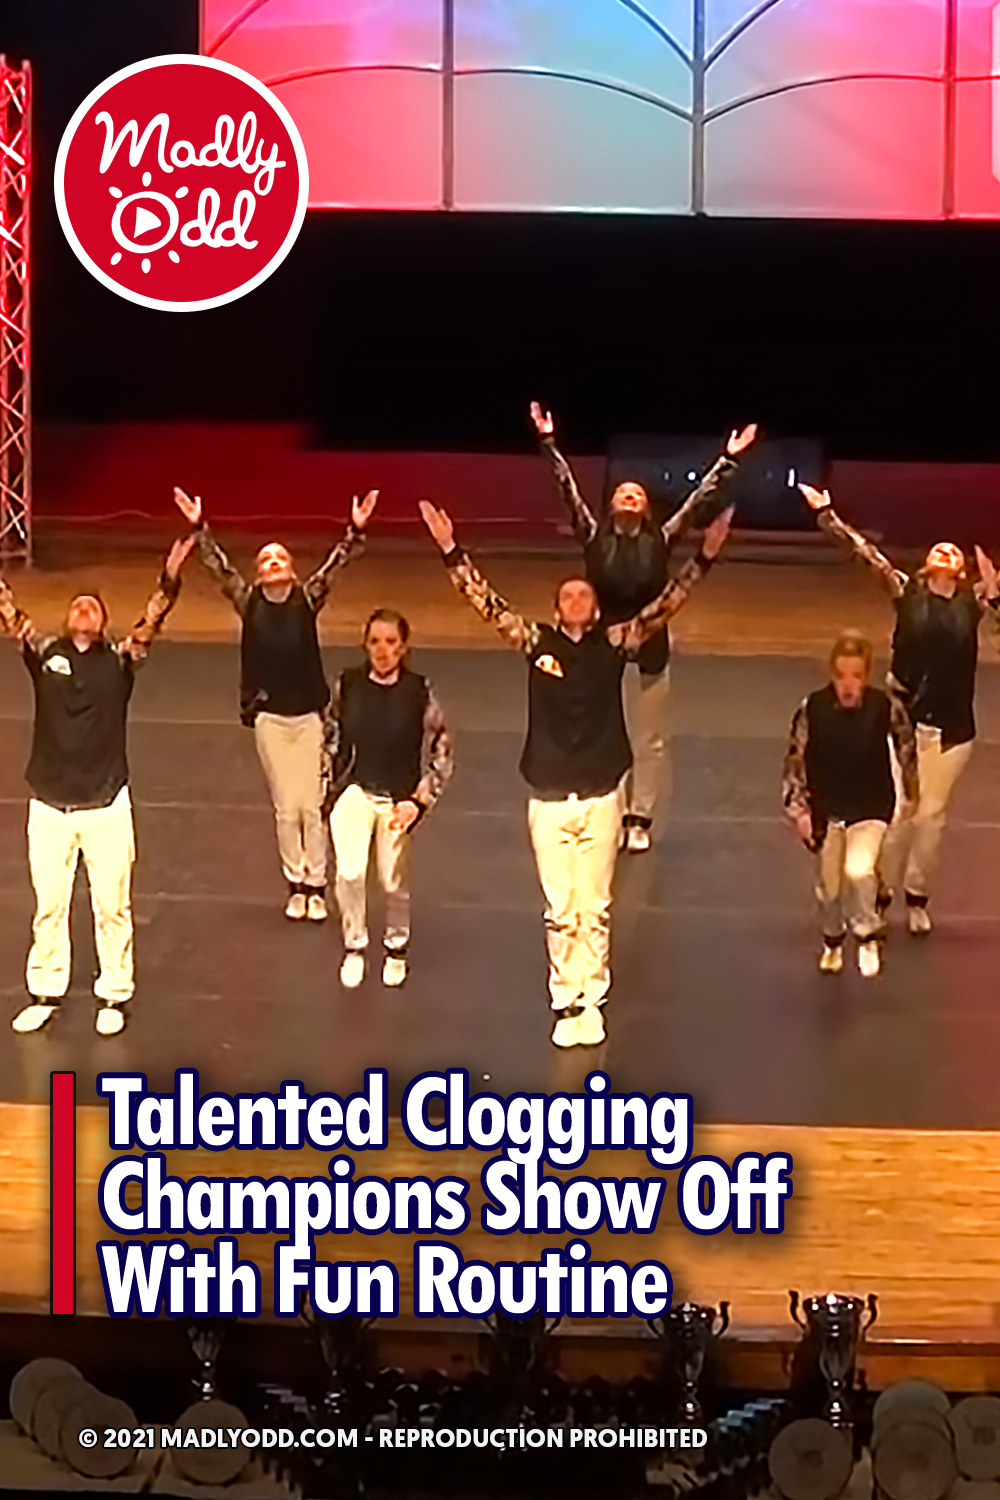 Talented Clogging Champions Show Off With Fun Routine